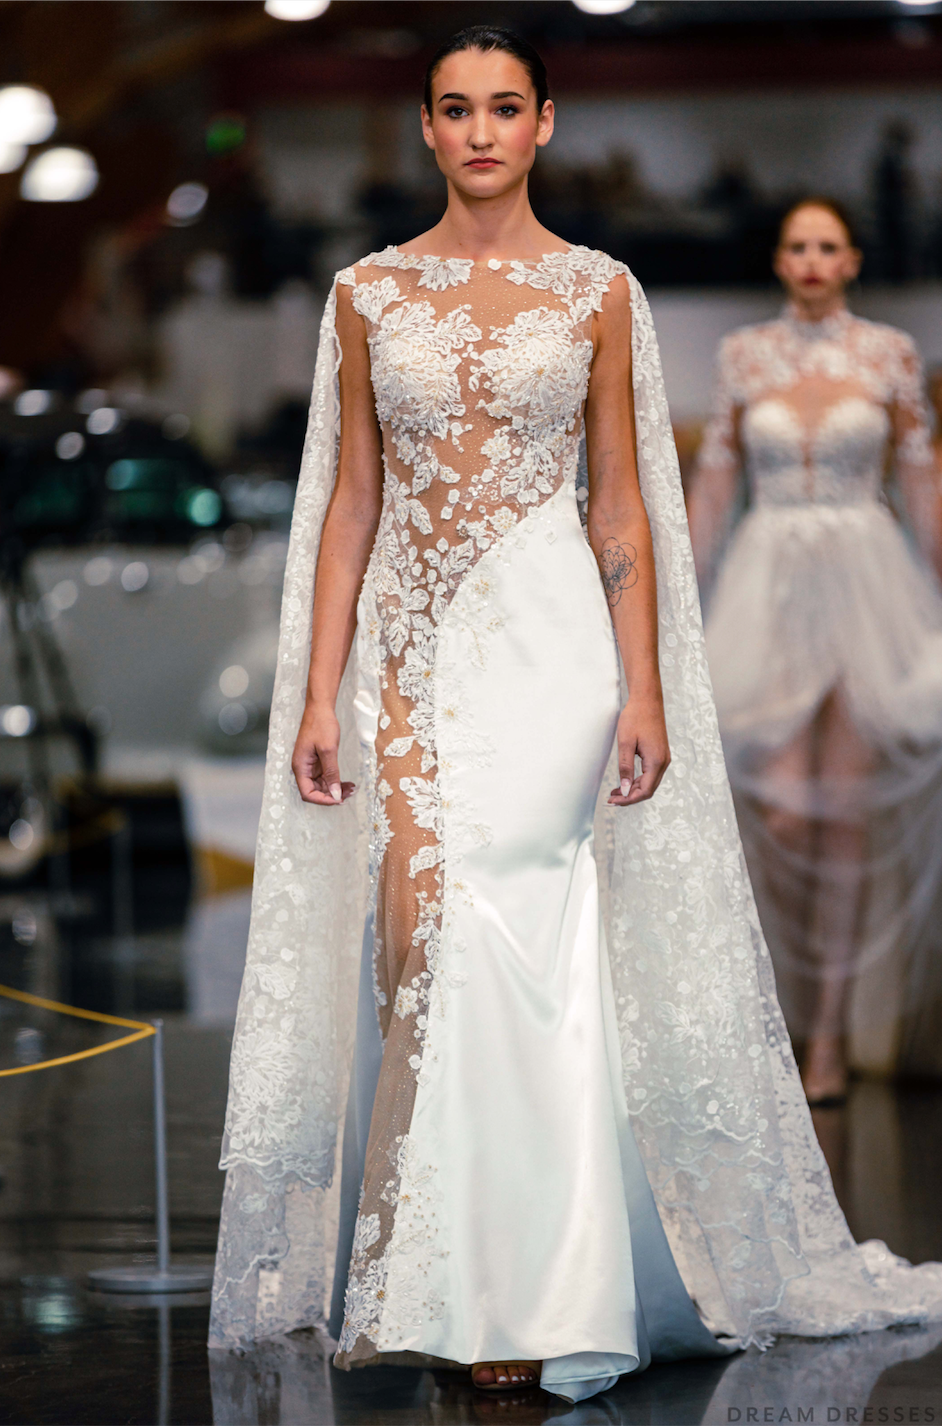 Illusion Cut-Out Wedding Dress (#Lucille)